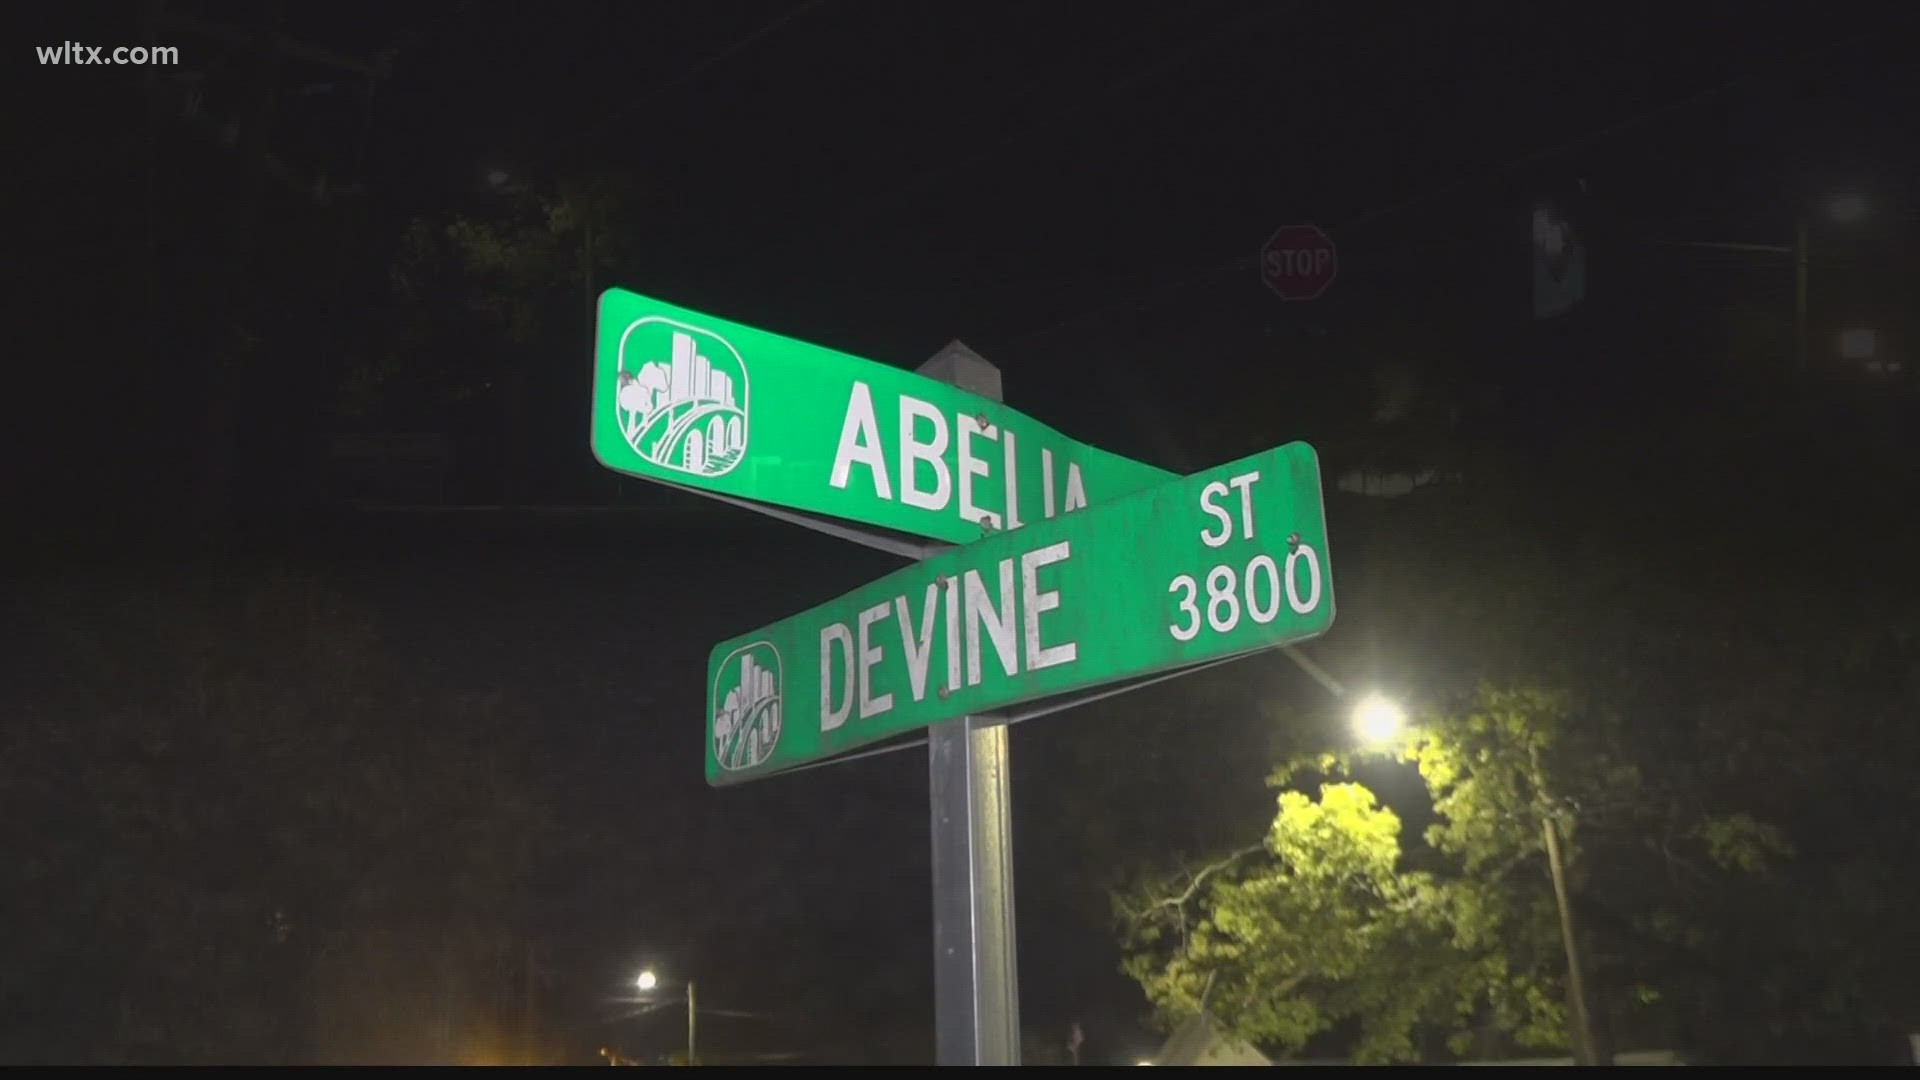 Columbia Police are investigating a fatal stabbing of a woman on the corner of Devine Street and Abelia Road.